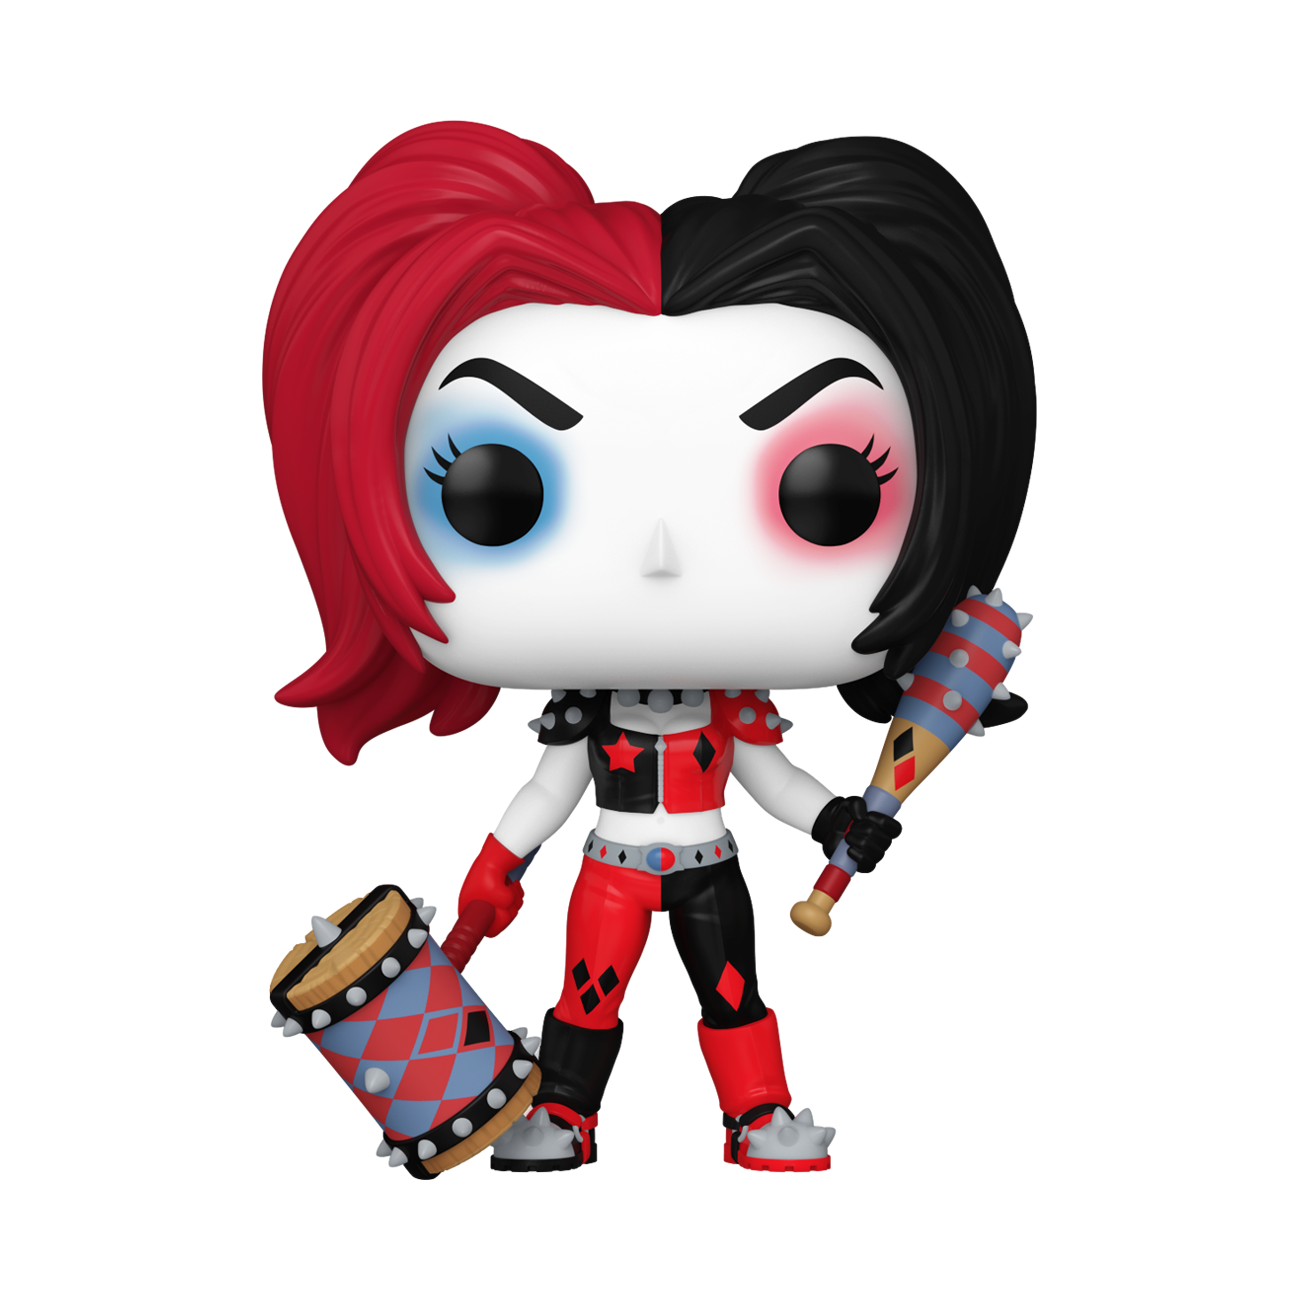 Funko POP! Heroes: DC Harley Quinn 30th Anniversary Edition (with Weapons) 4-in Vinyl Figure